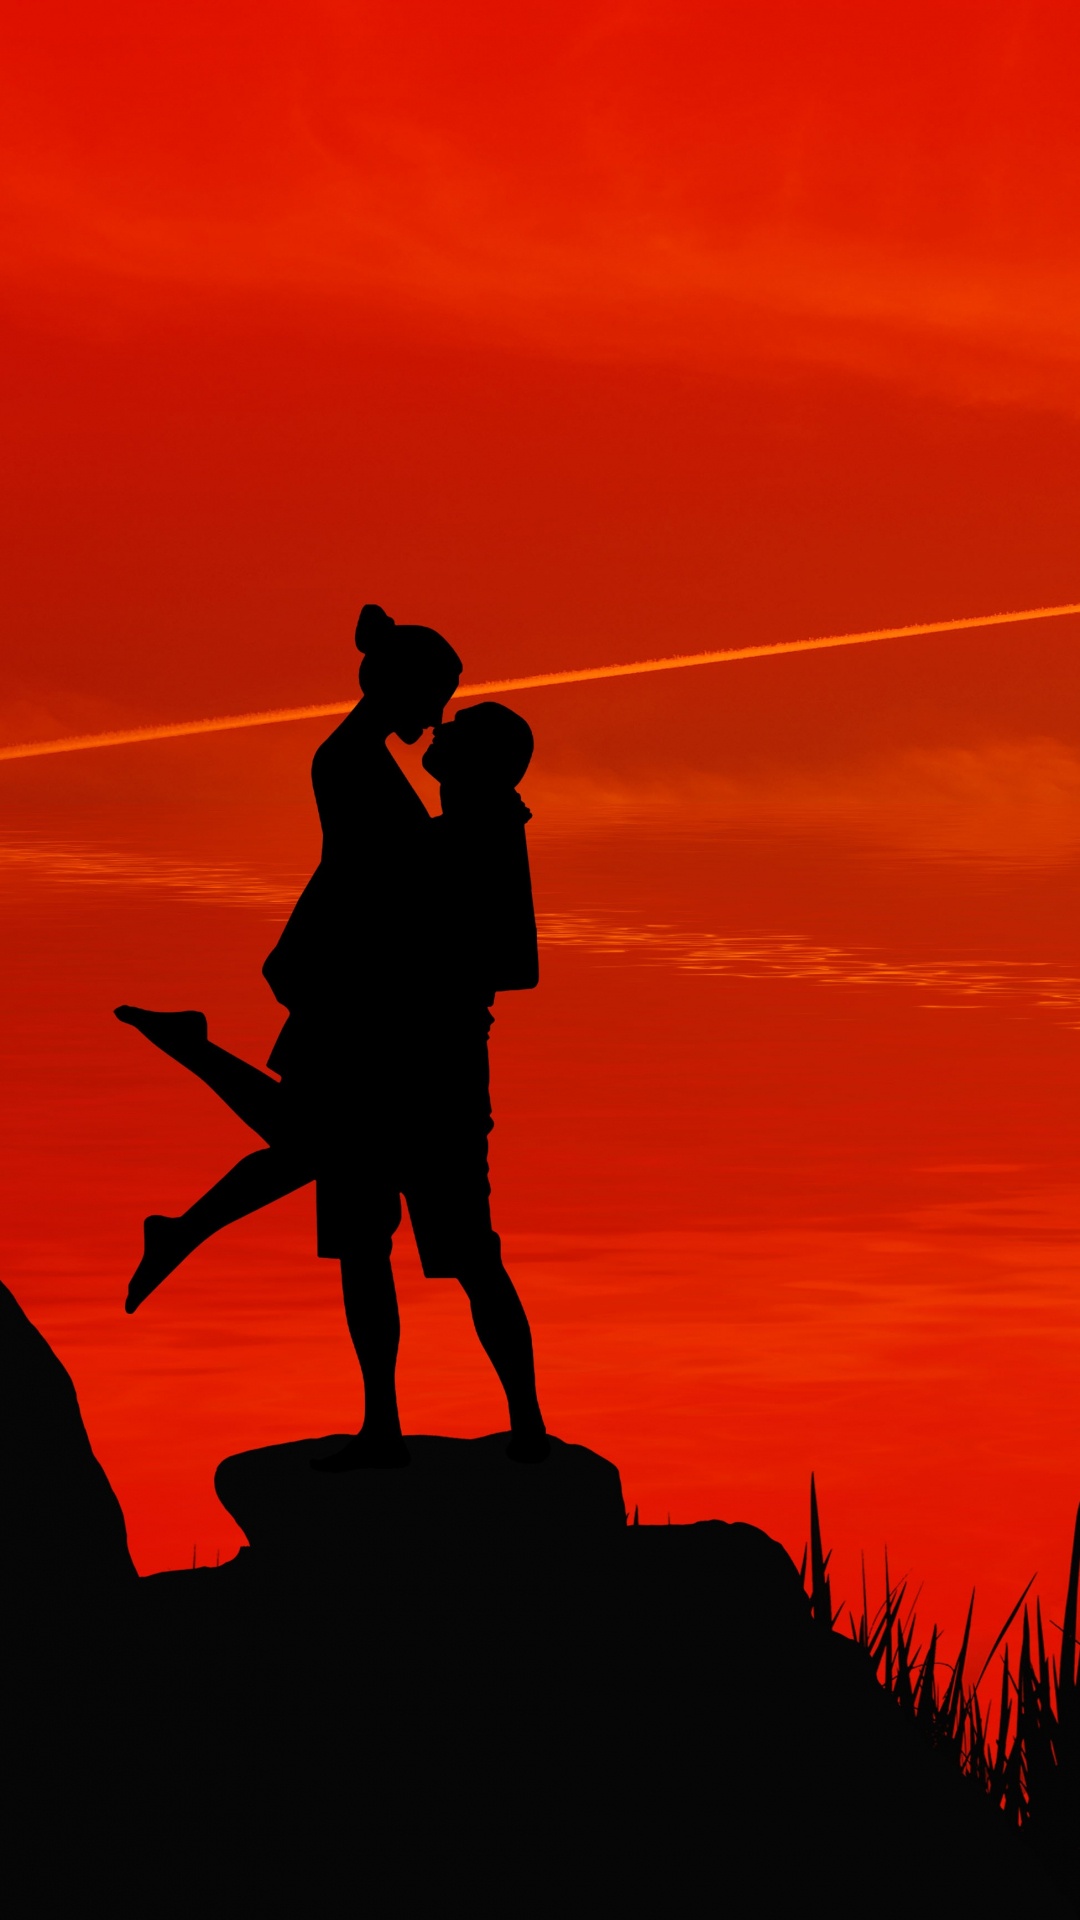 Silhouette, Sunset, Passion, People in Nature, Red. Wallpaper in 1080x1920 Resolution